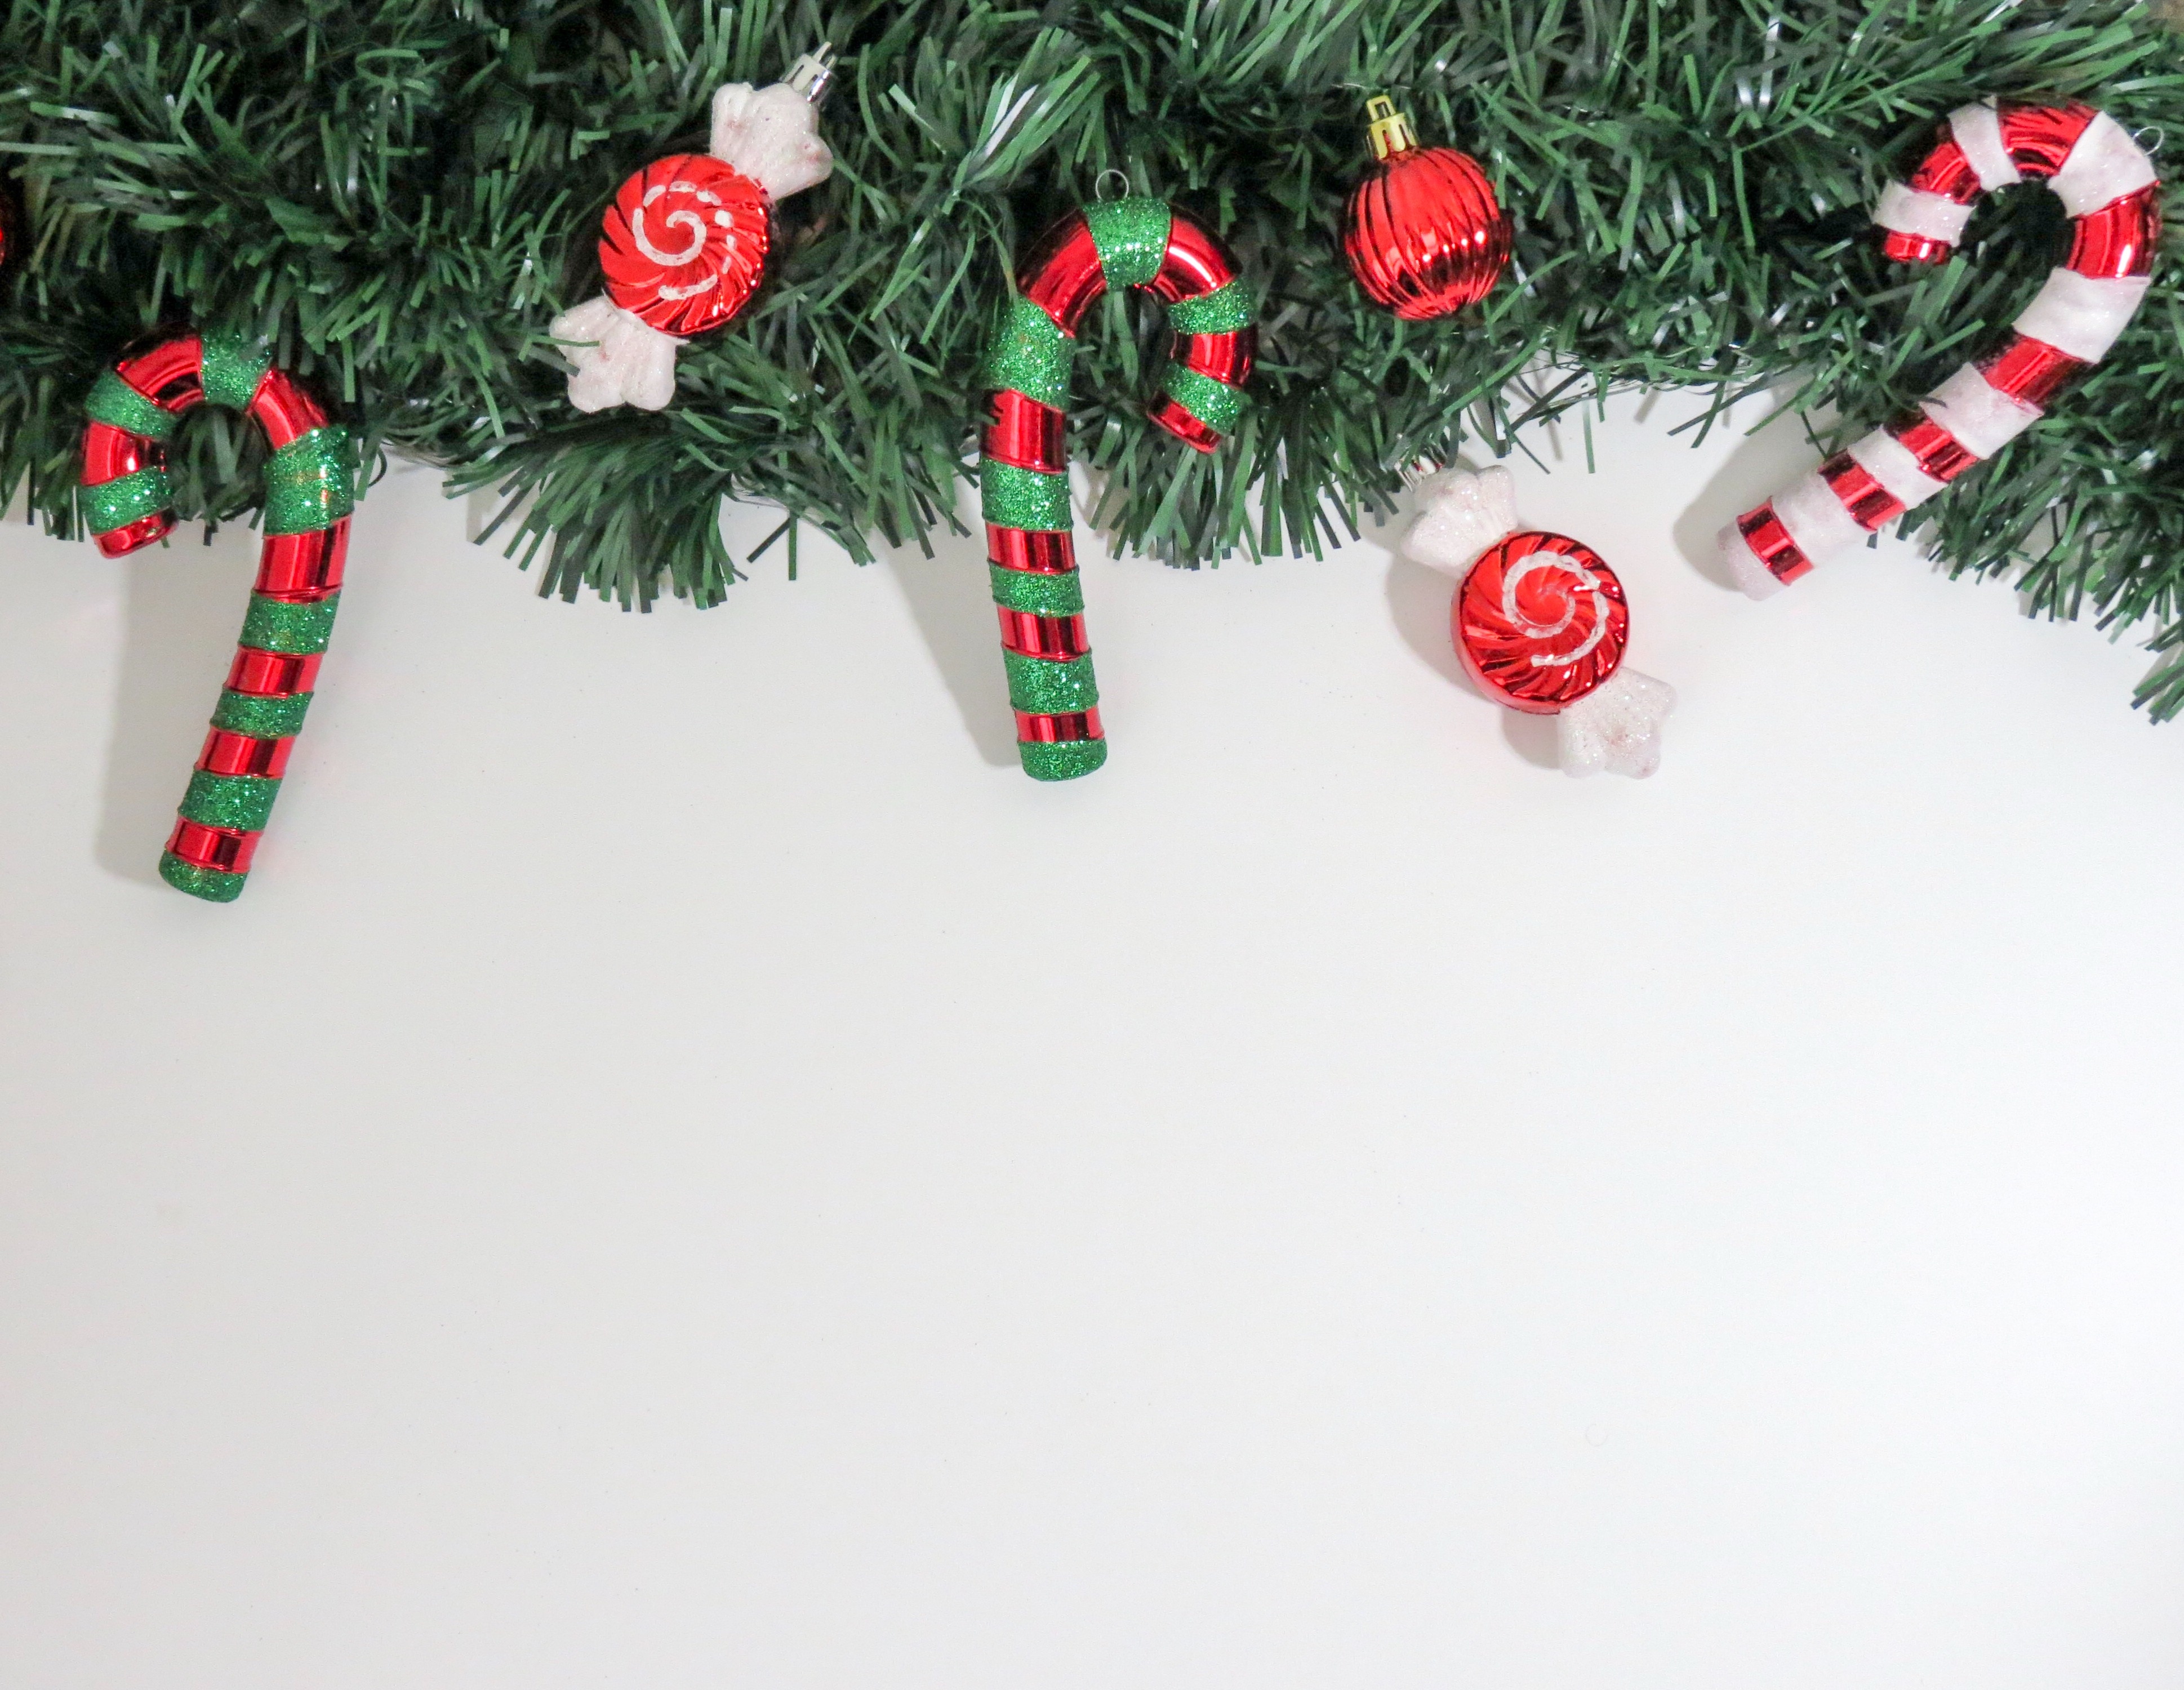 3 candy canes, 3 baubles and green christmas garland decors